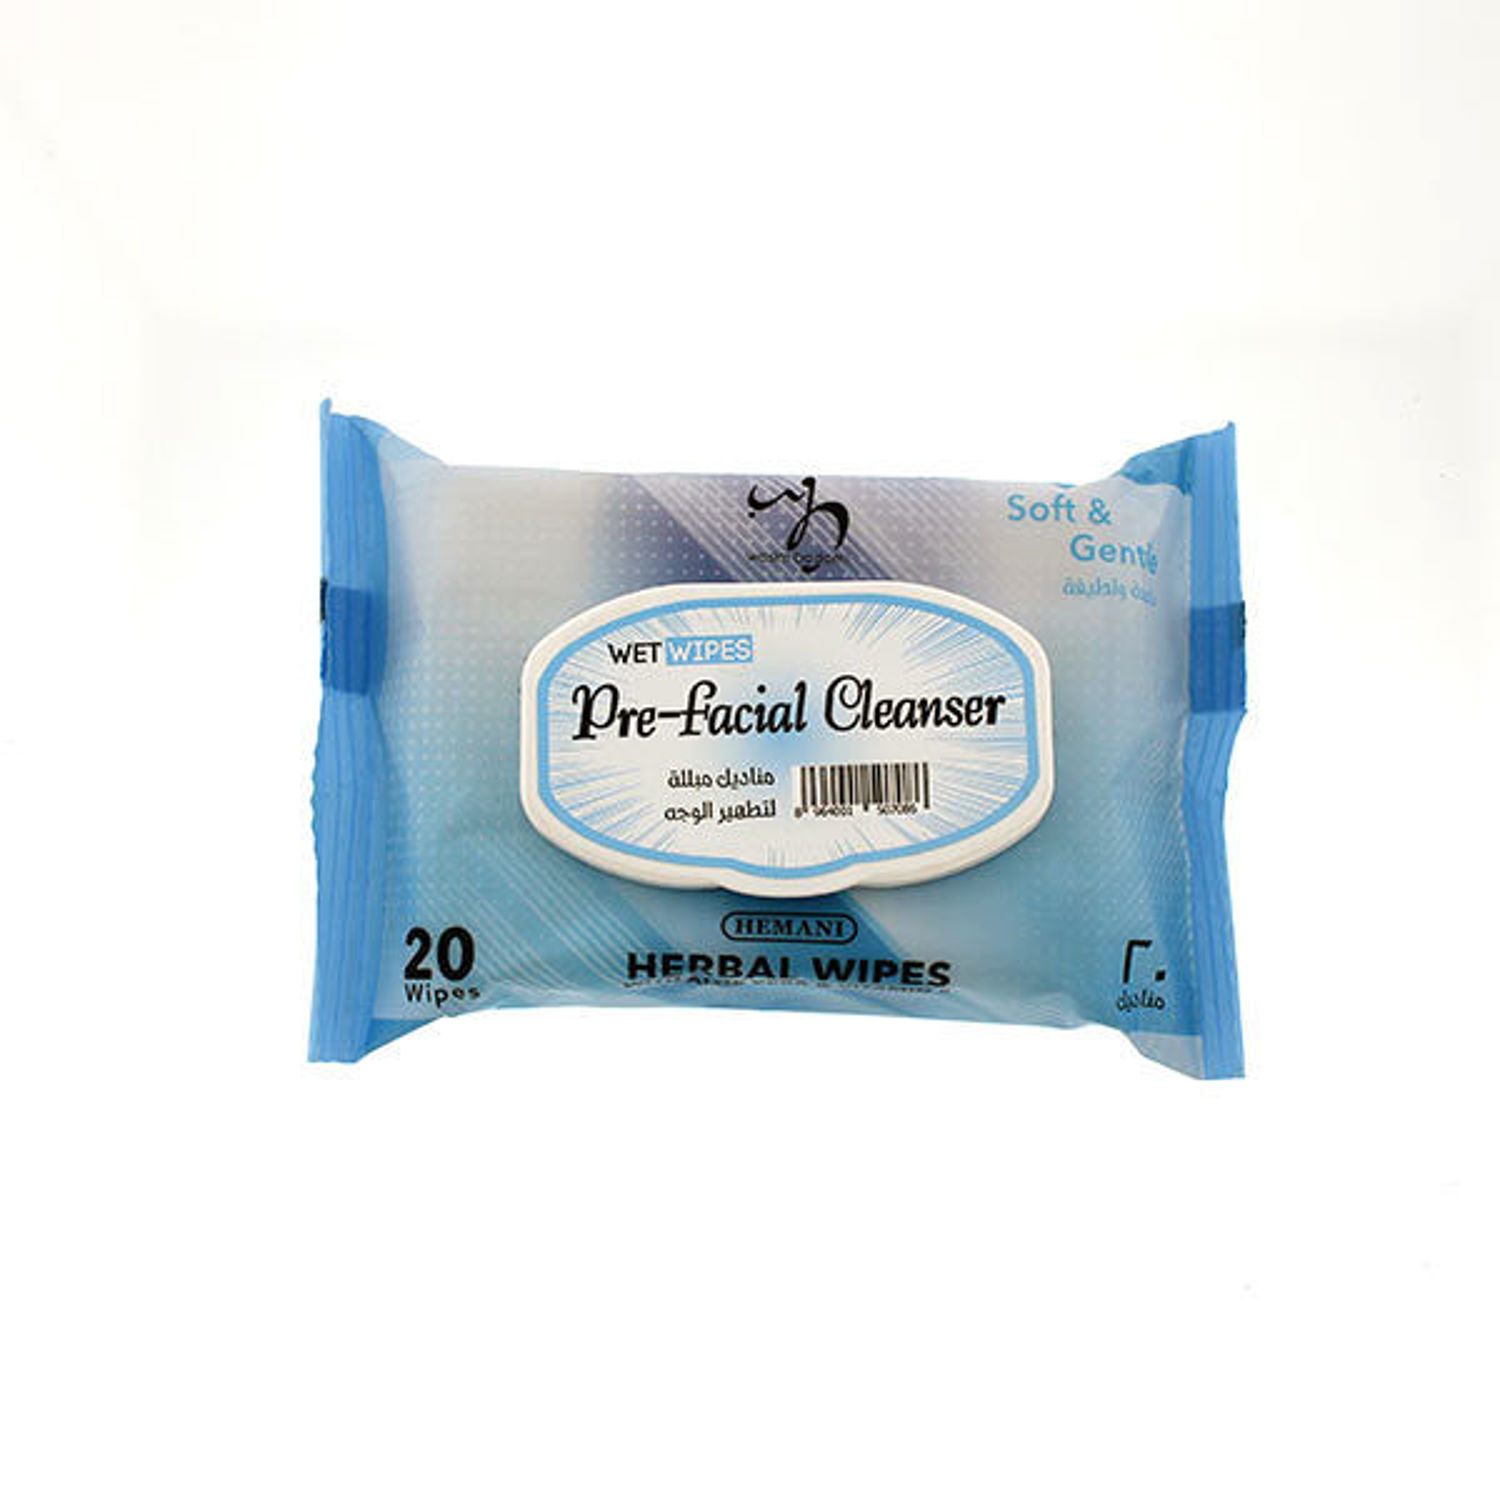 Pre-facial Cleanser Wet Wipes